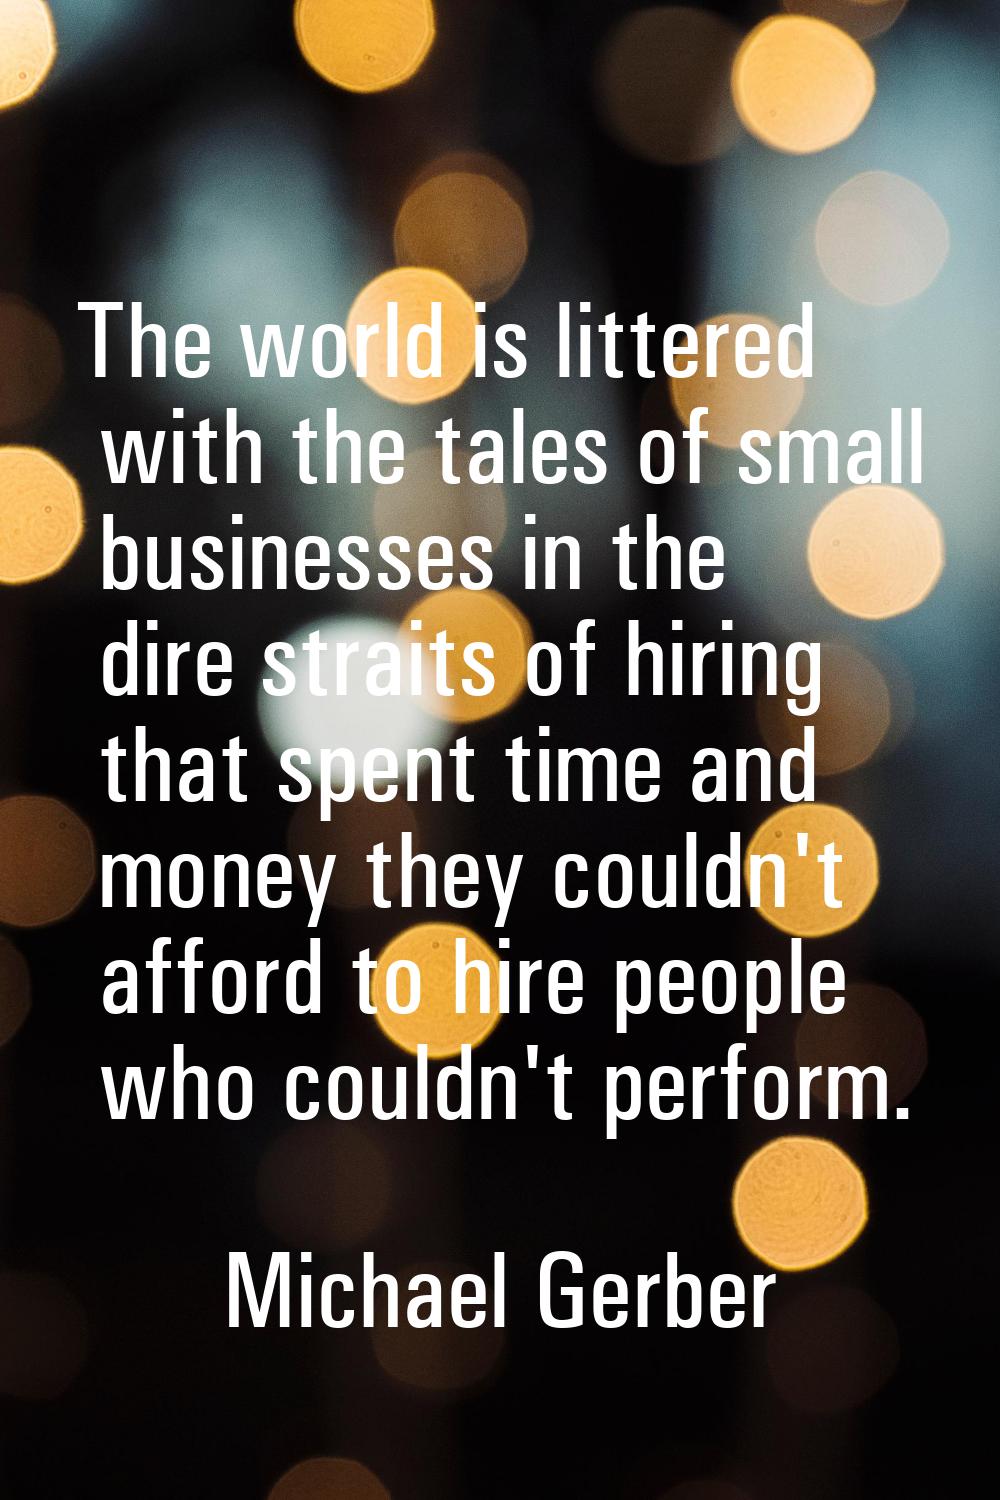 The world is littered with the tales of small businesses in the dire straits of hiring that spent t